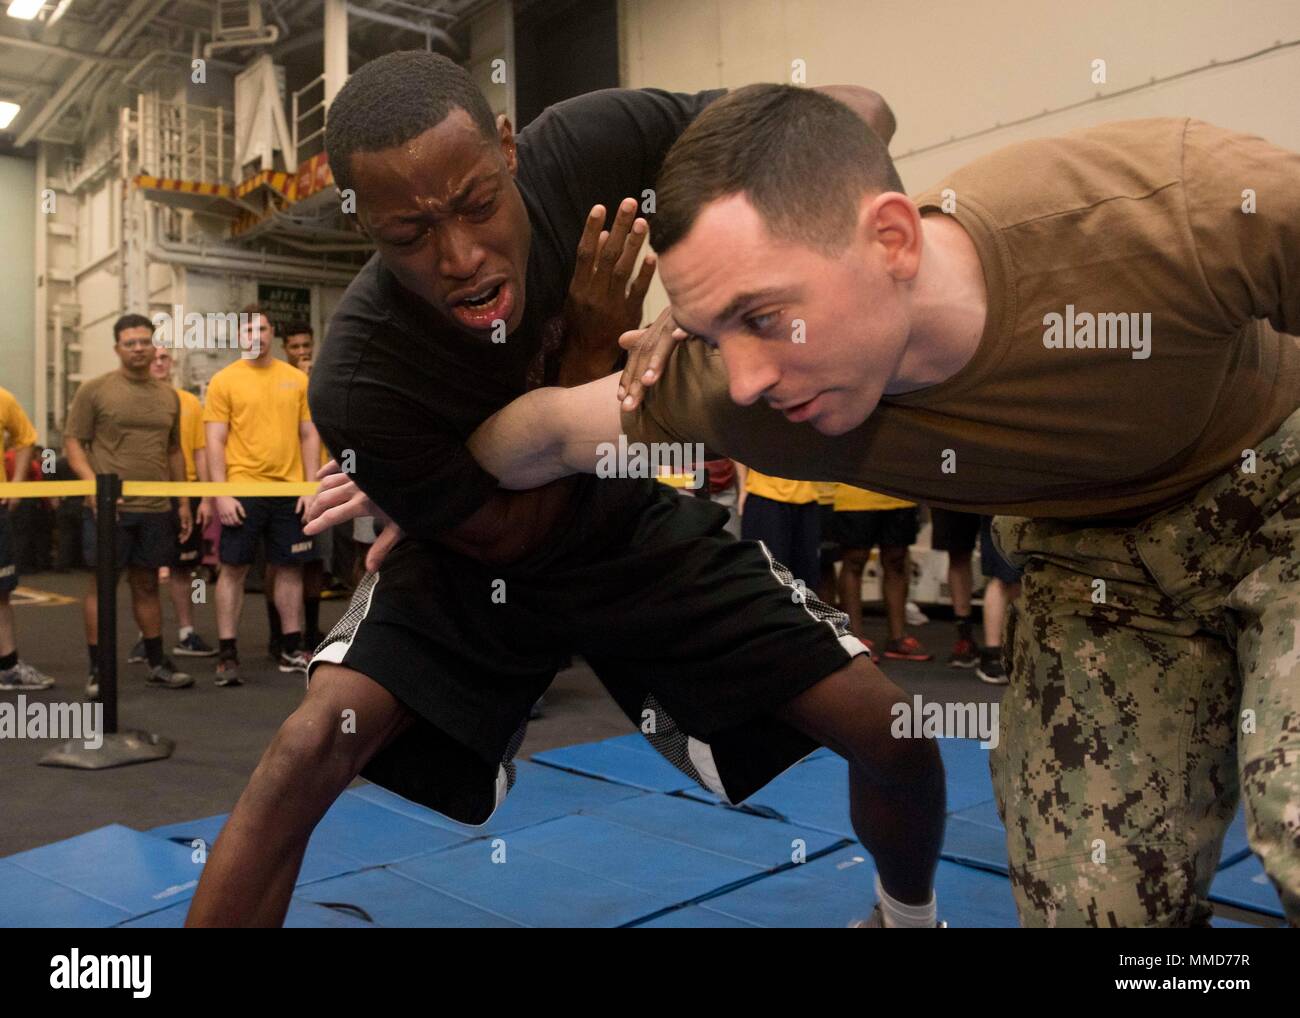 171018-N-YN937-152 ATLANTIC OCEAN (Oct. 18, 2017) Aviation Boatswain's Mate (Fuel) 3rd Class Antonio Perkins, left, performs a takedown on Master-at-Arms 2nd Class James Volponi during security reaction force training in the hangar bay aboard USS Harry S. Truman (CVN 75). Truman is currently underway conducting Tailored Shipboard Test Availability and Final Evaluation Problem (TSTA/FEP) in preparation for future operations. (U.S. Navy photo by Mass Communication Specialist 3rd Class Alan Lewis/Released) Stock Photo